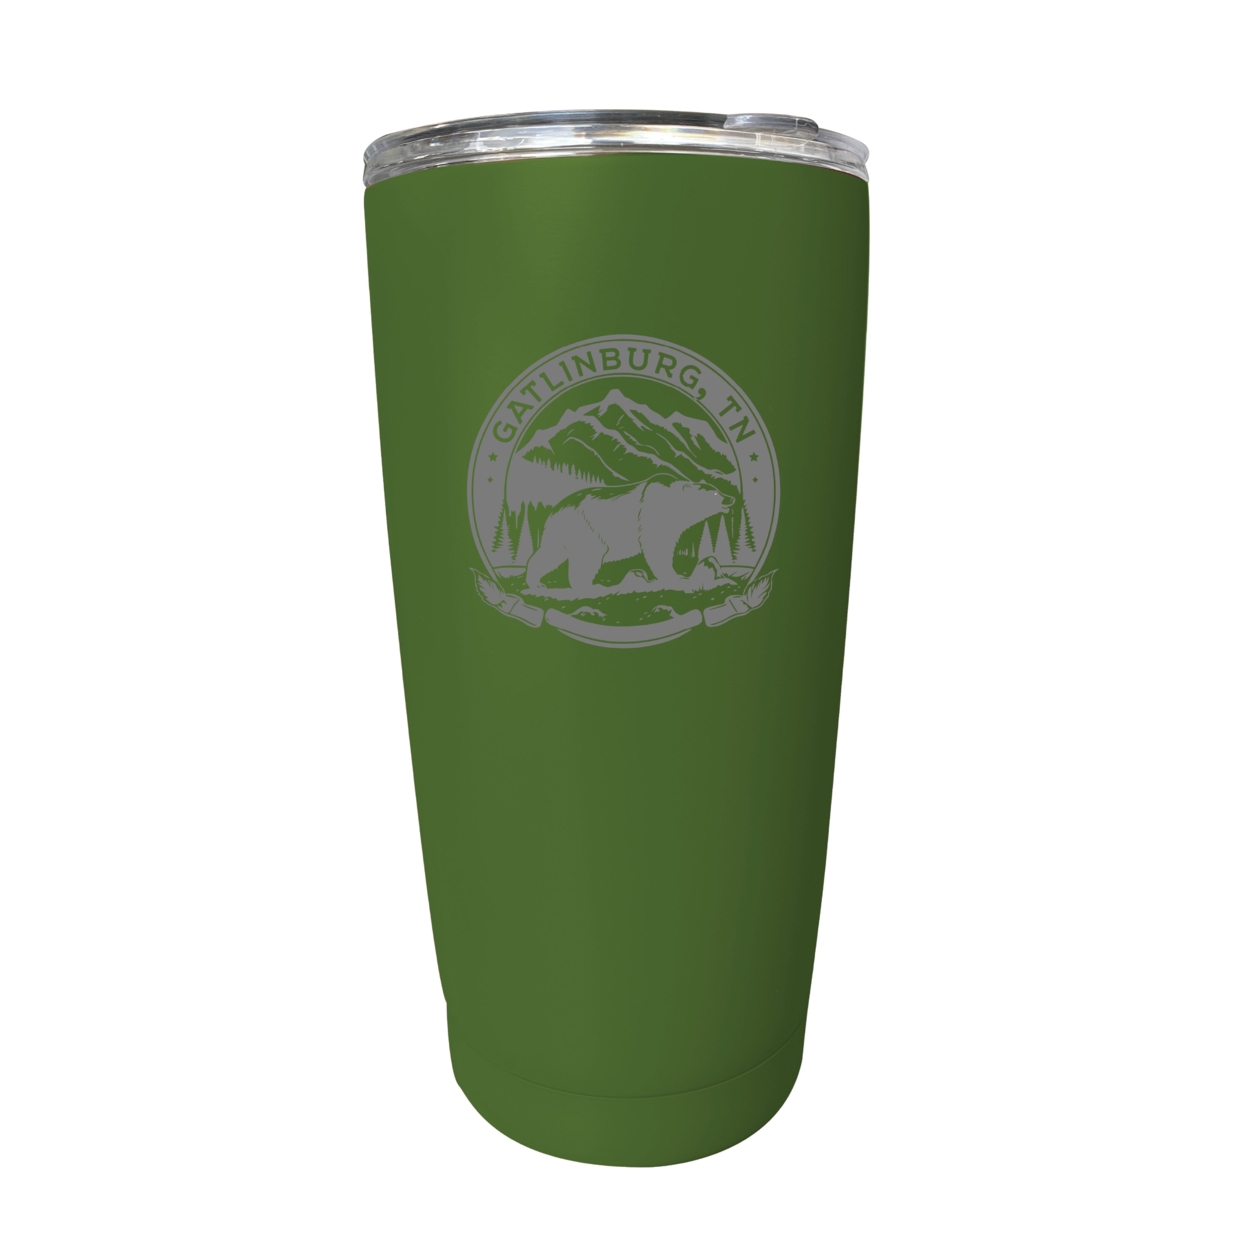 Gatlinburg Tennessee Laser Etched Souvenir 16 Oz Stainless Steel Insulated Tumbler - Yellow